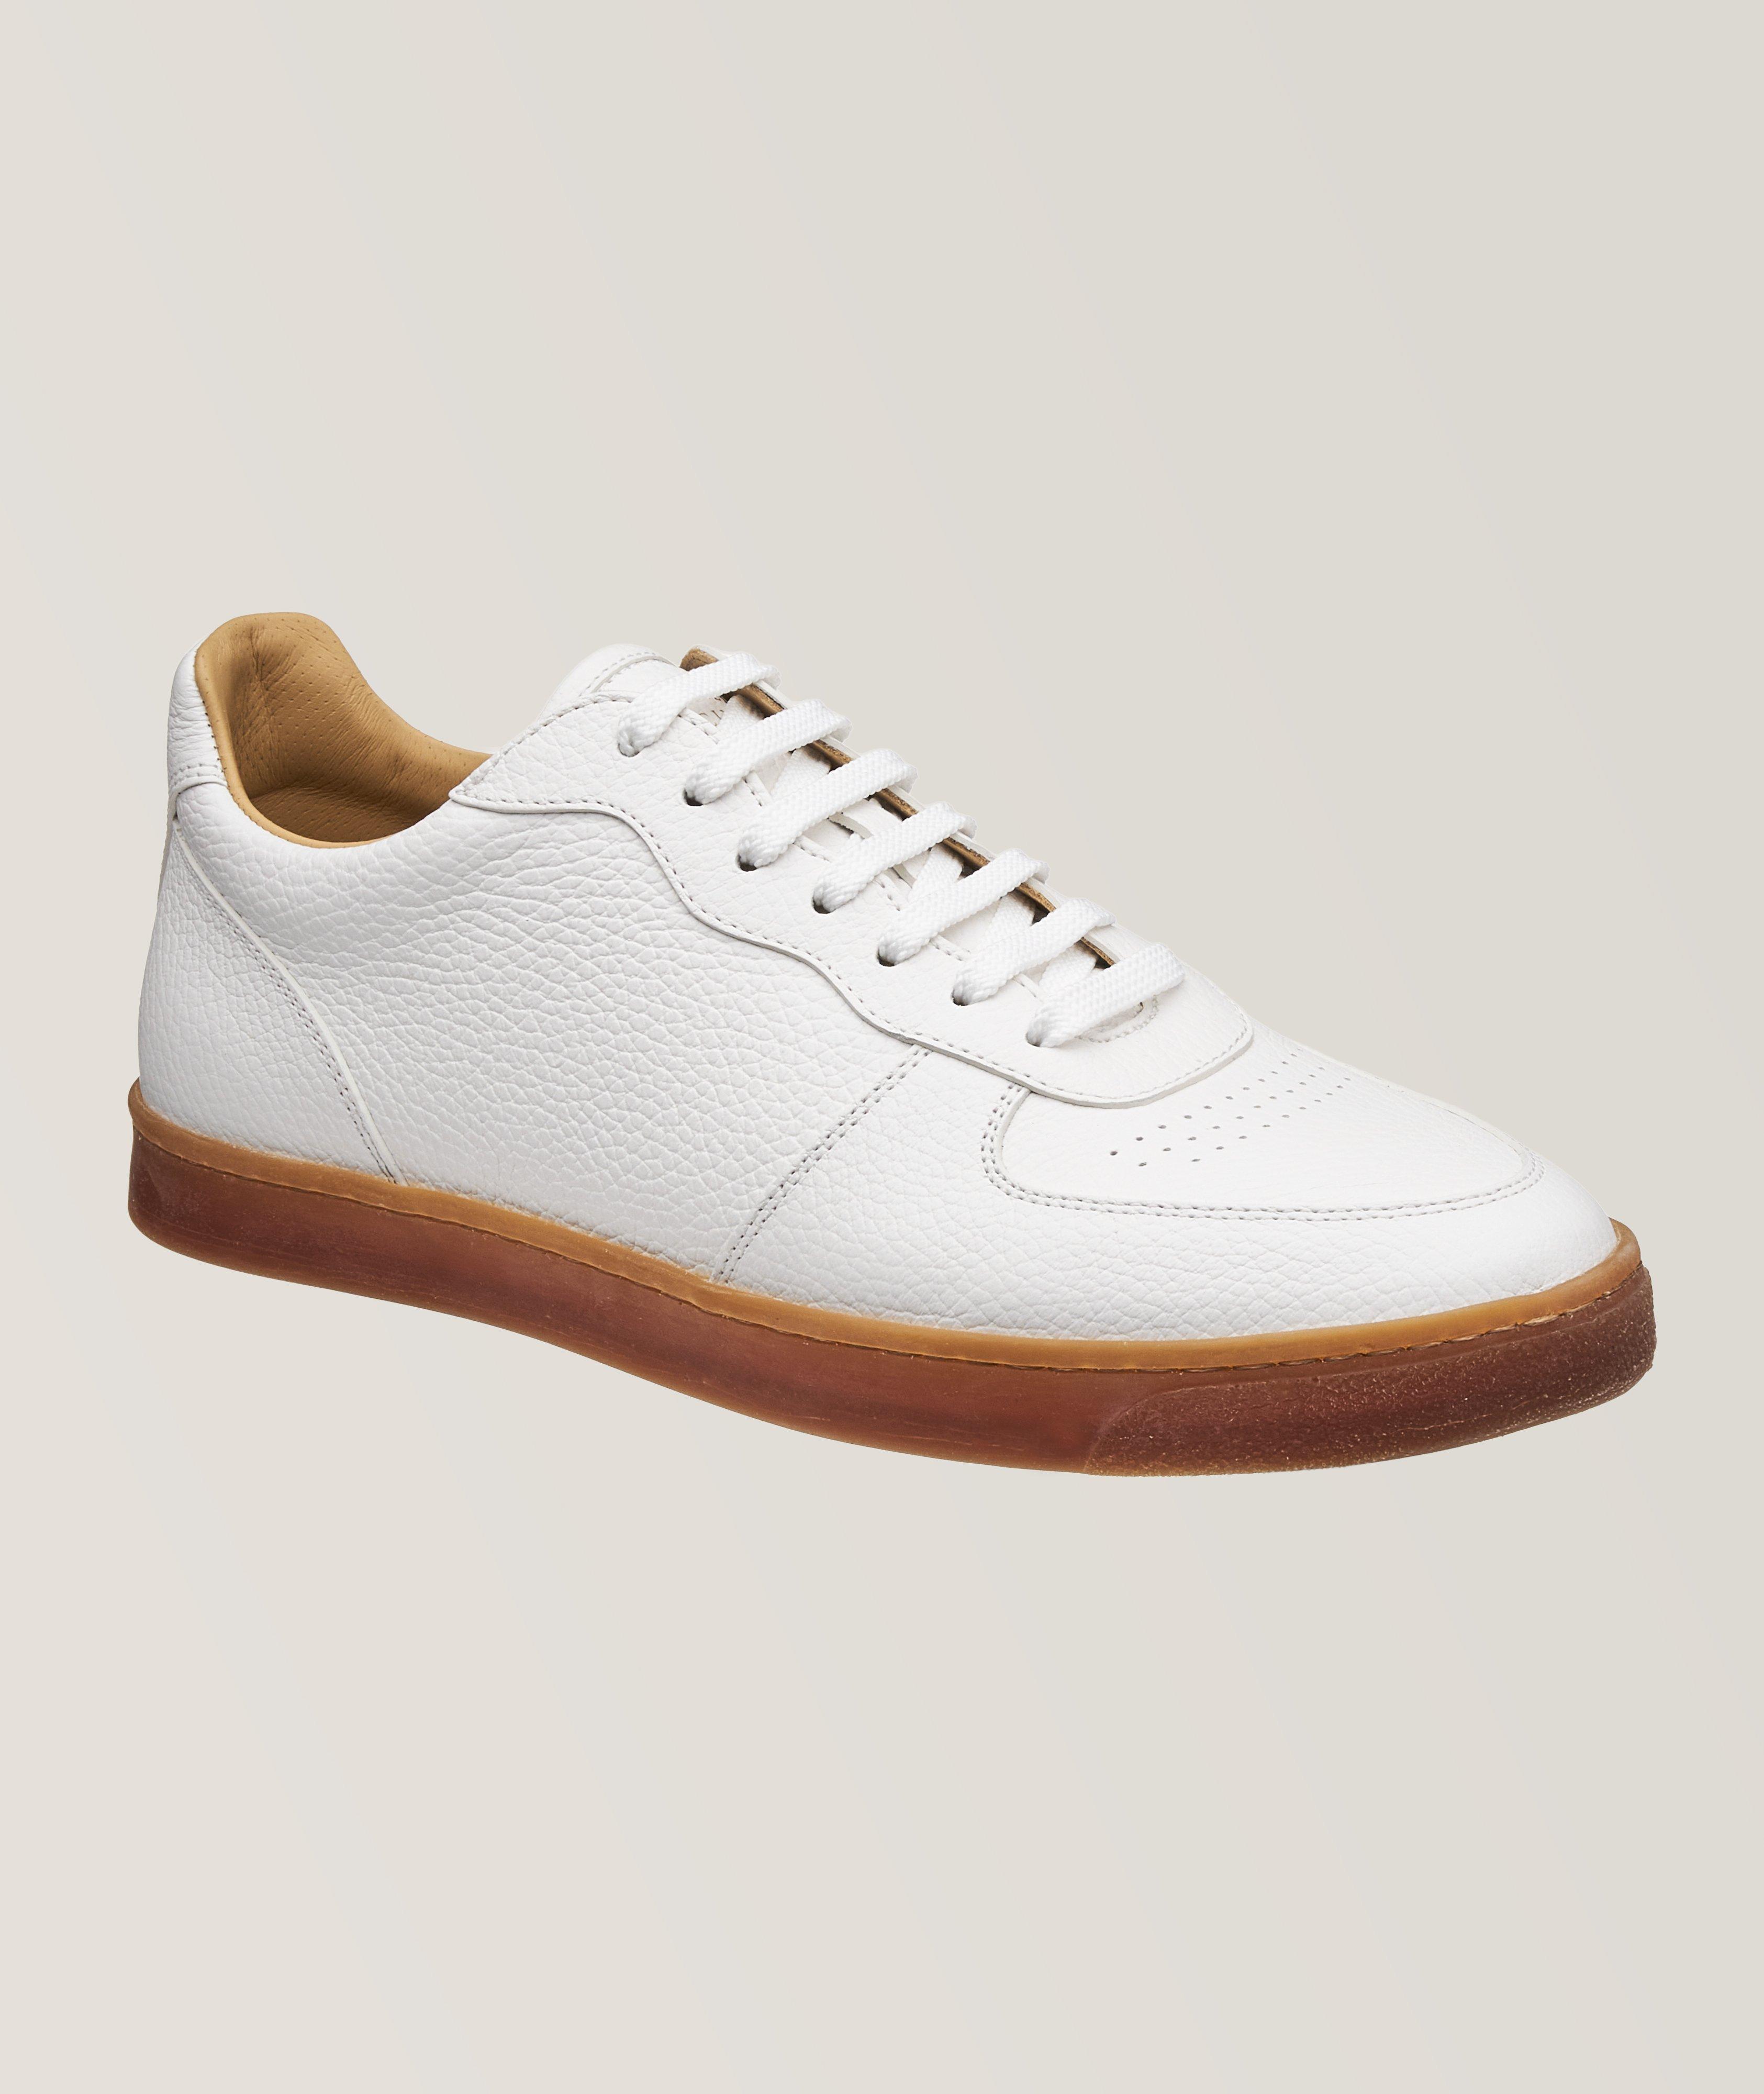 Hevea Pebbled Leather Low-Top Sneakers